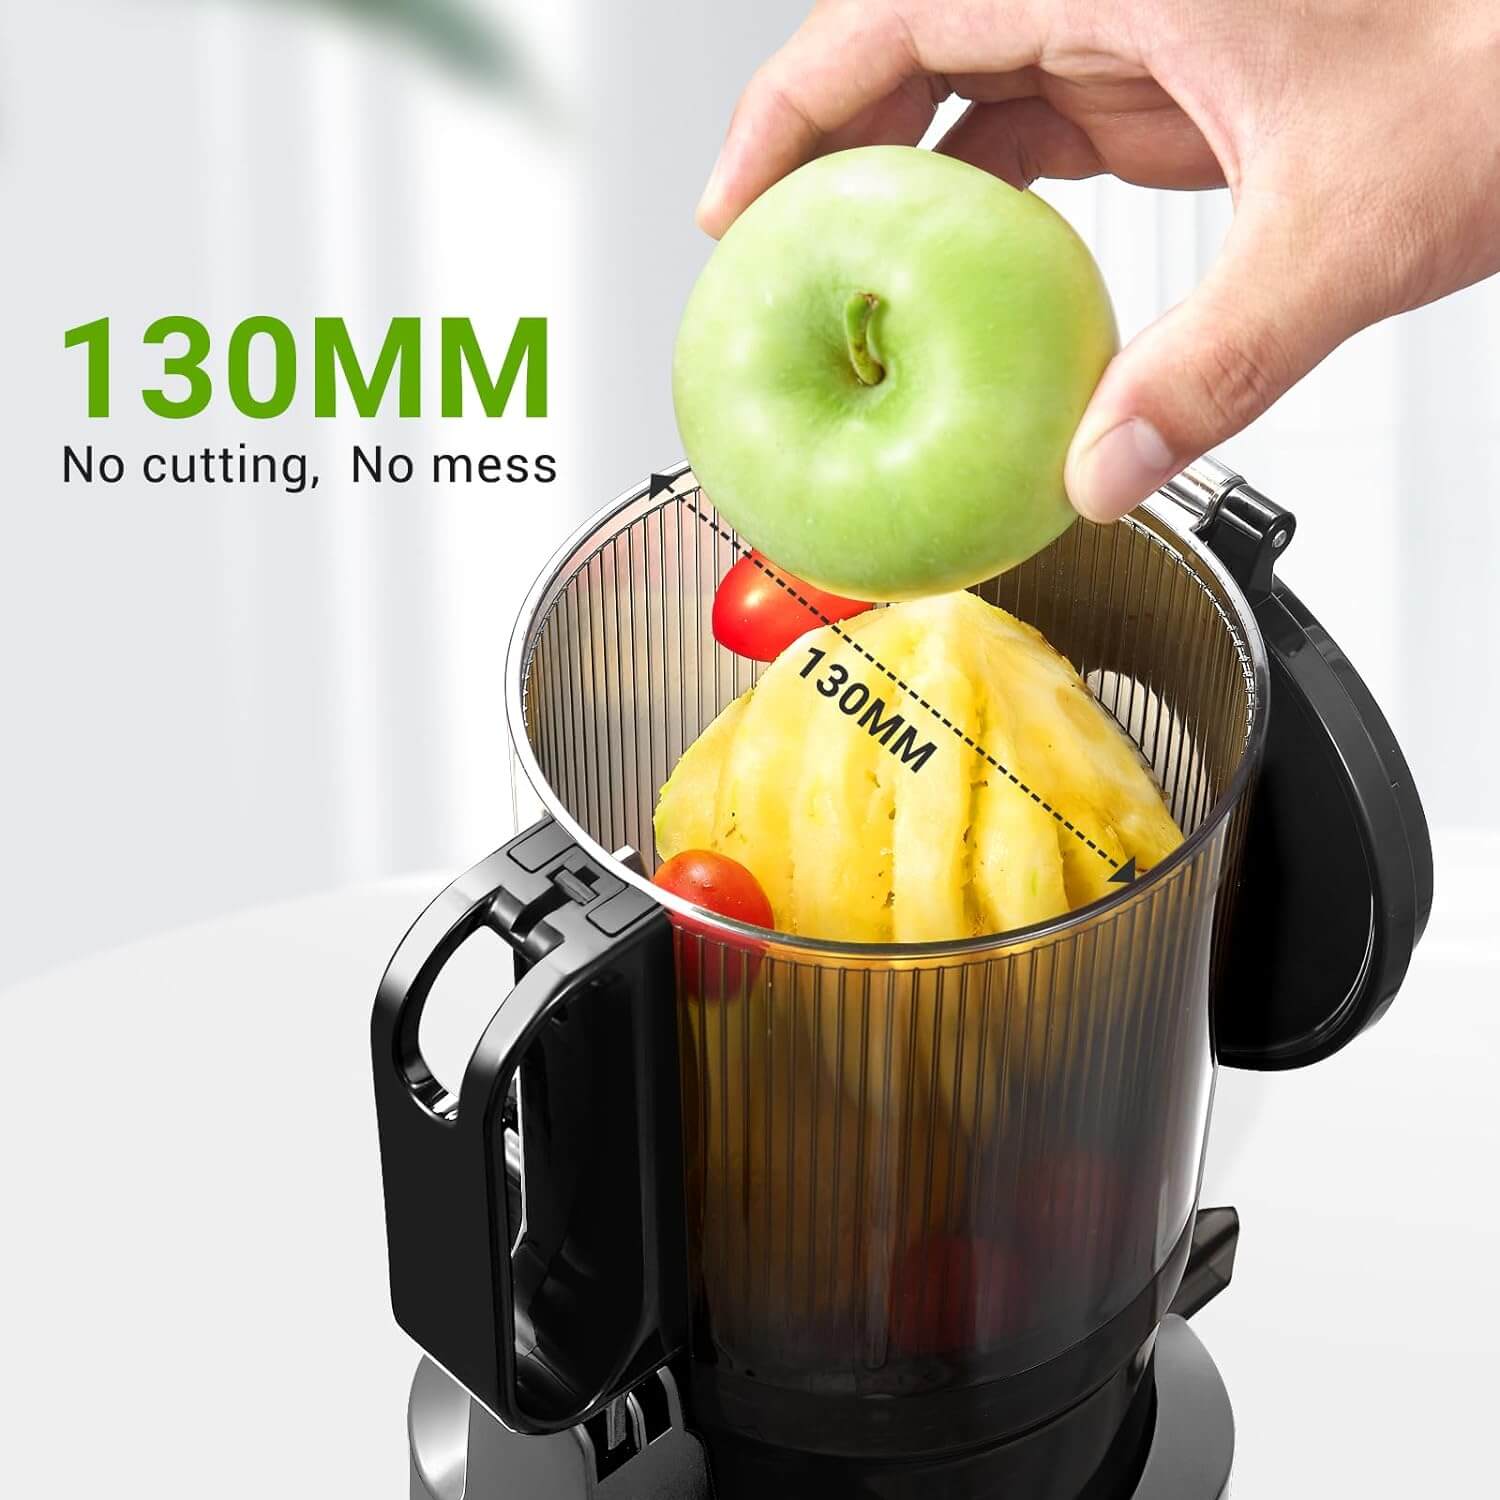 AMZCHEF Masticating Juicer 5.3-Inch Self-Feeding Fit Whole Fruits & Vegetables